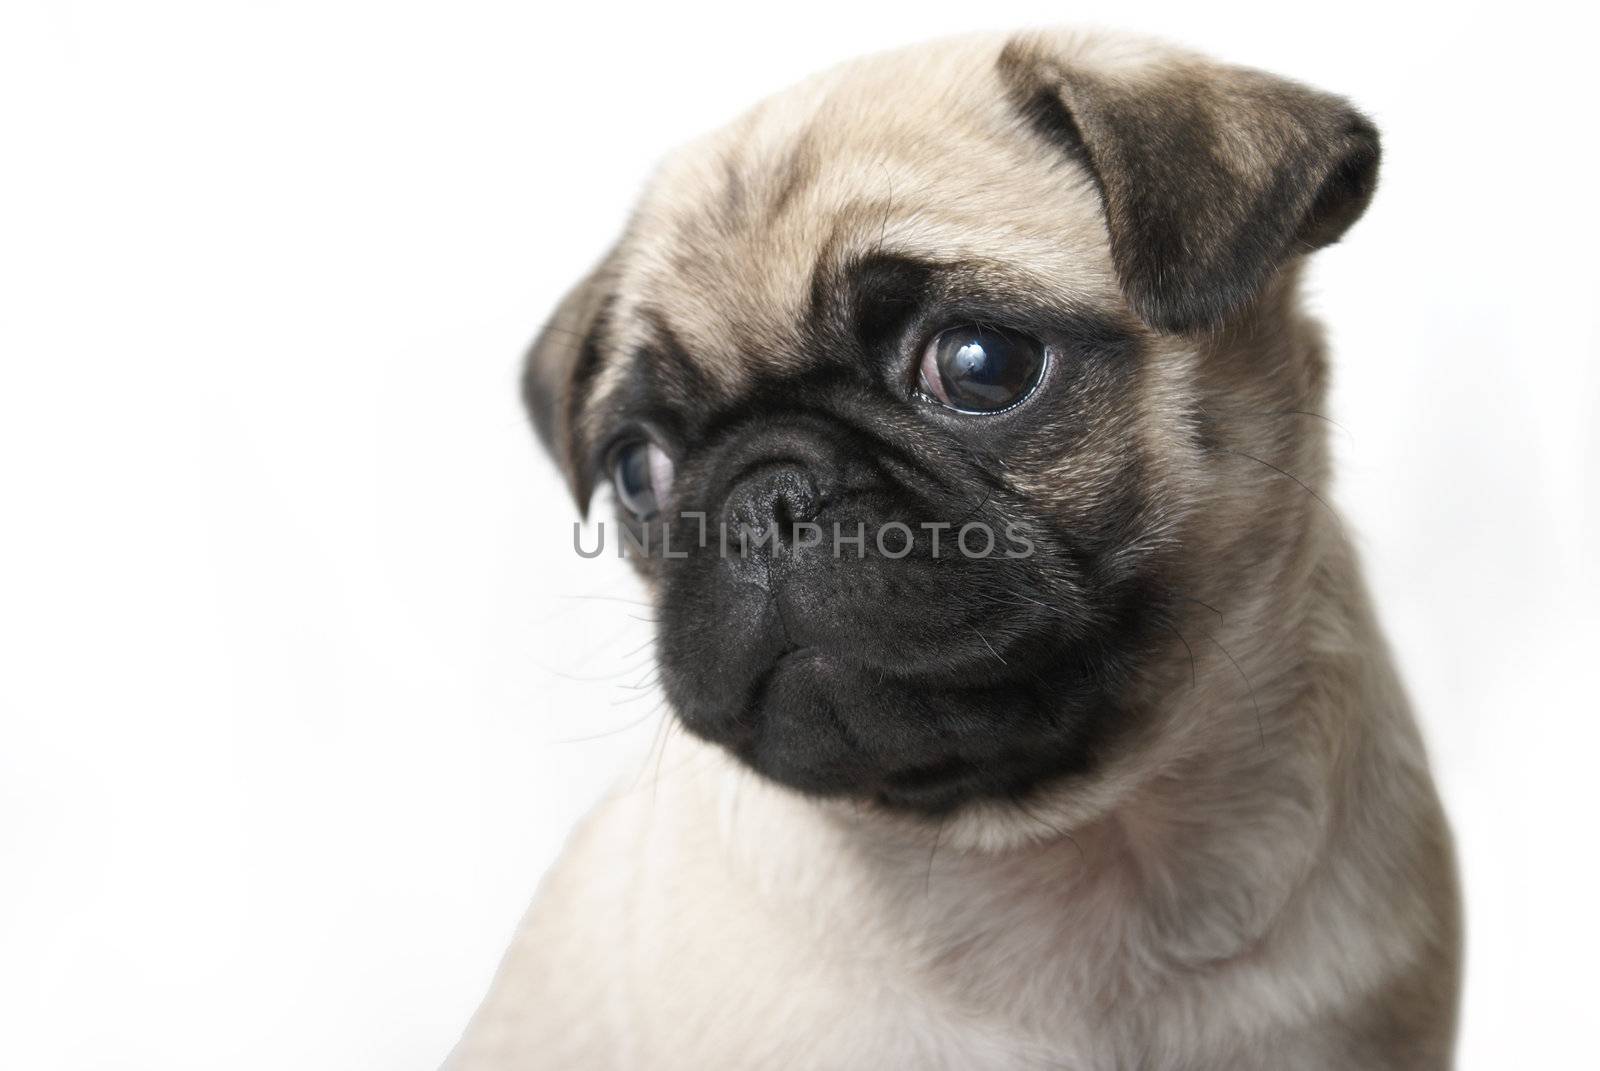 An adorable pug puppy sits and looks out of the frame where there is also copy-space.